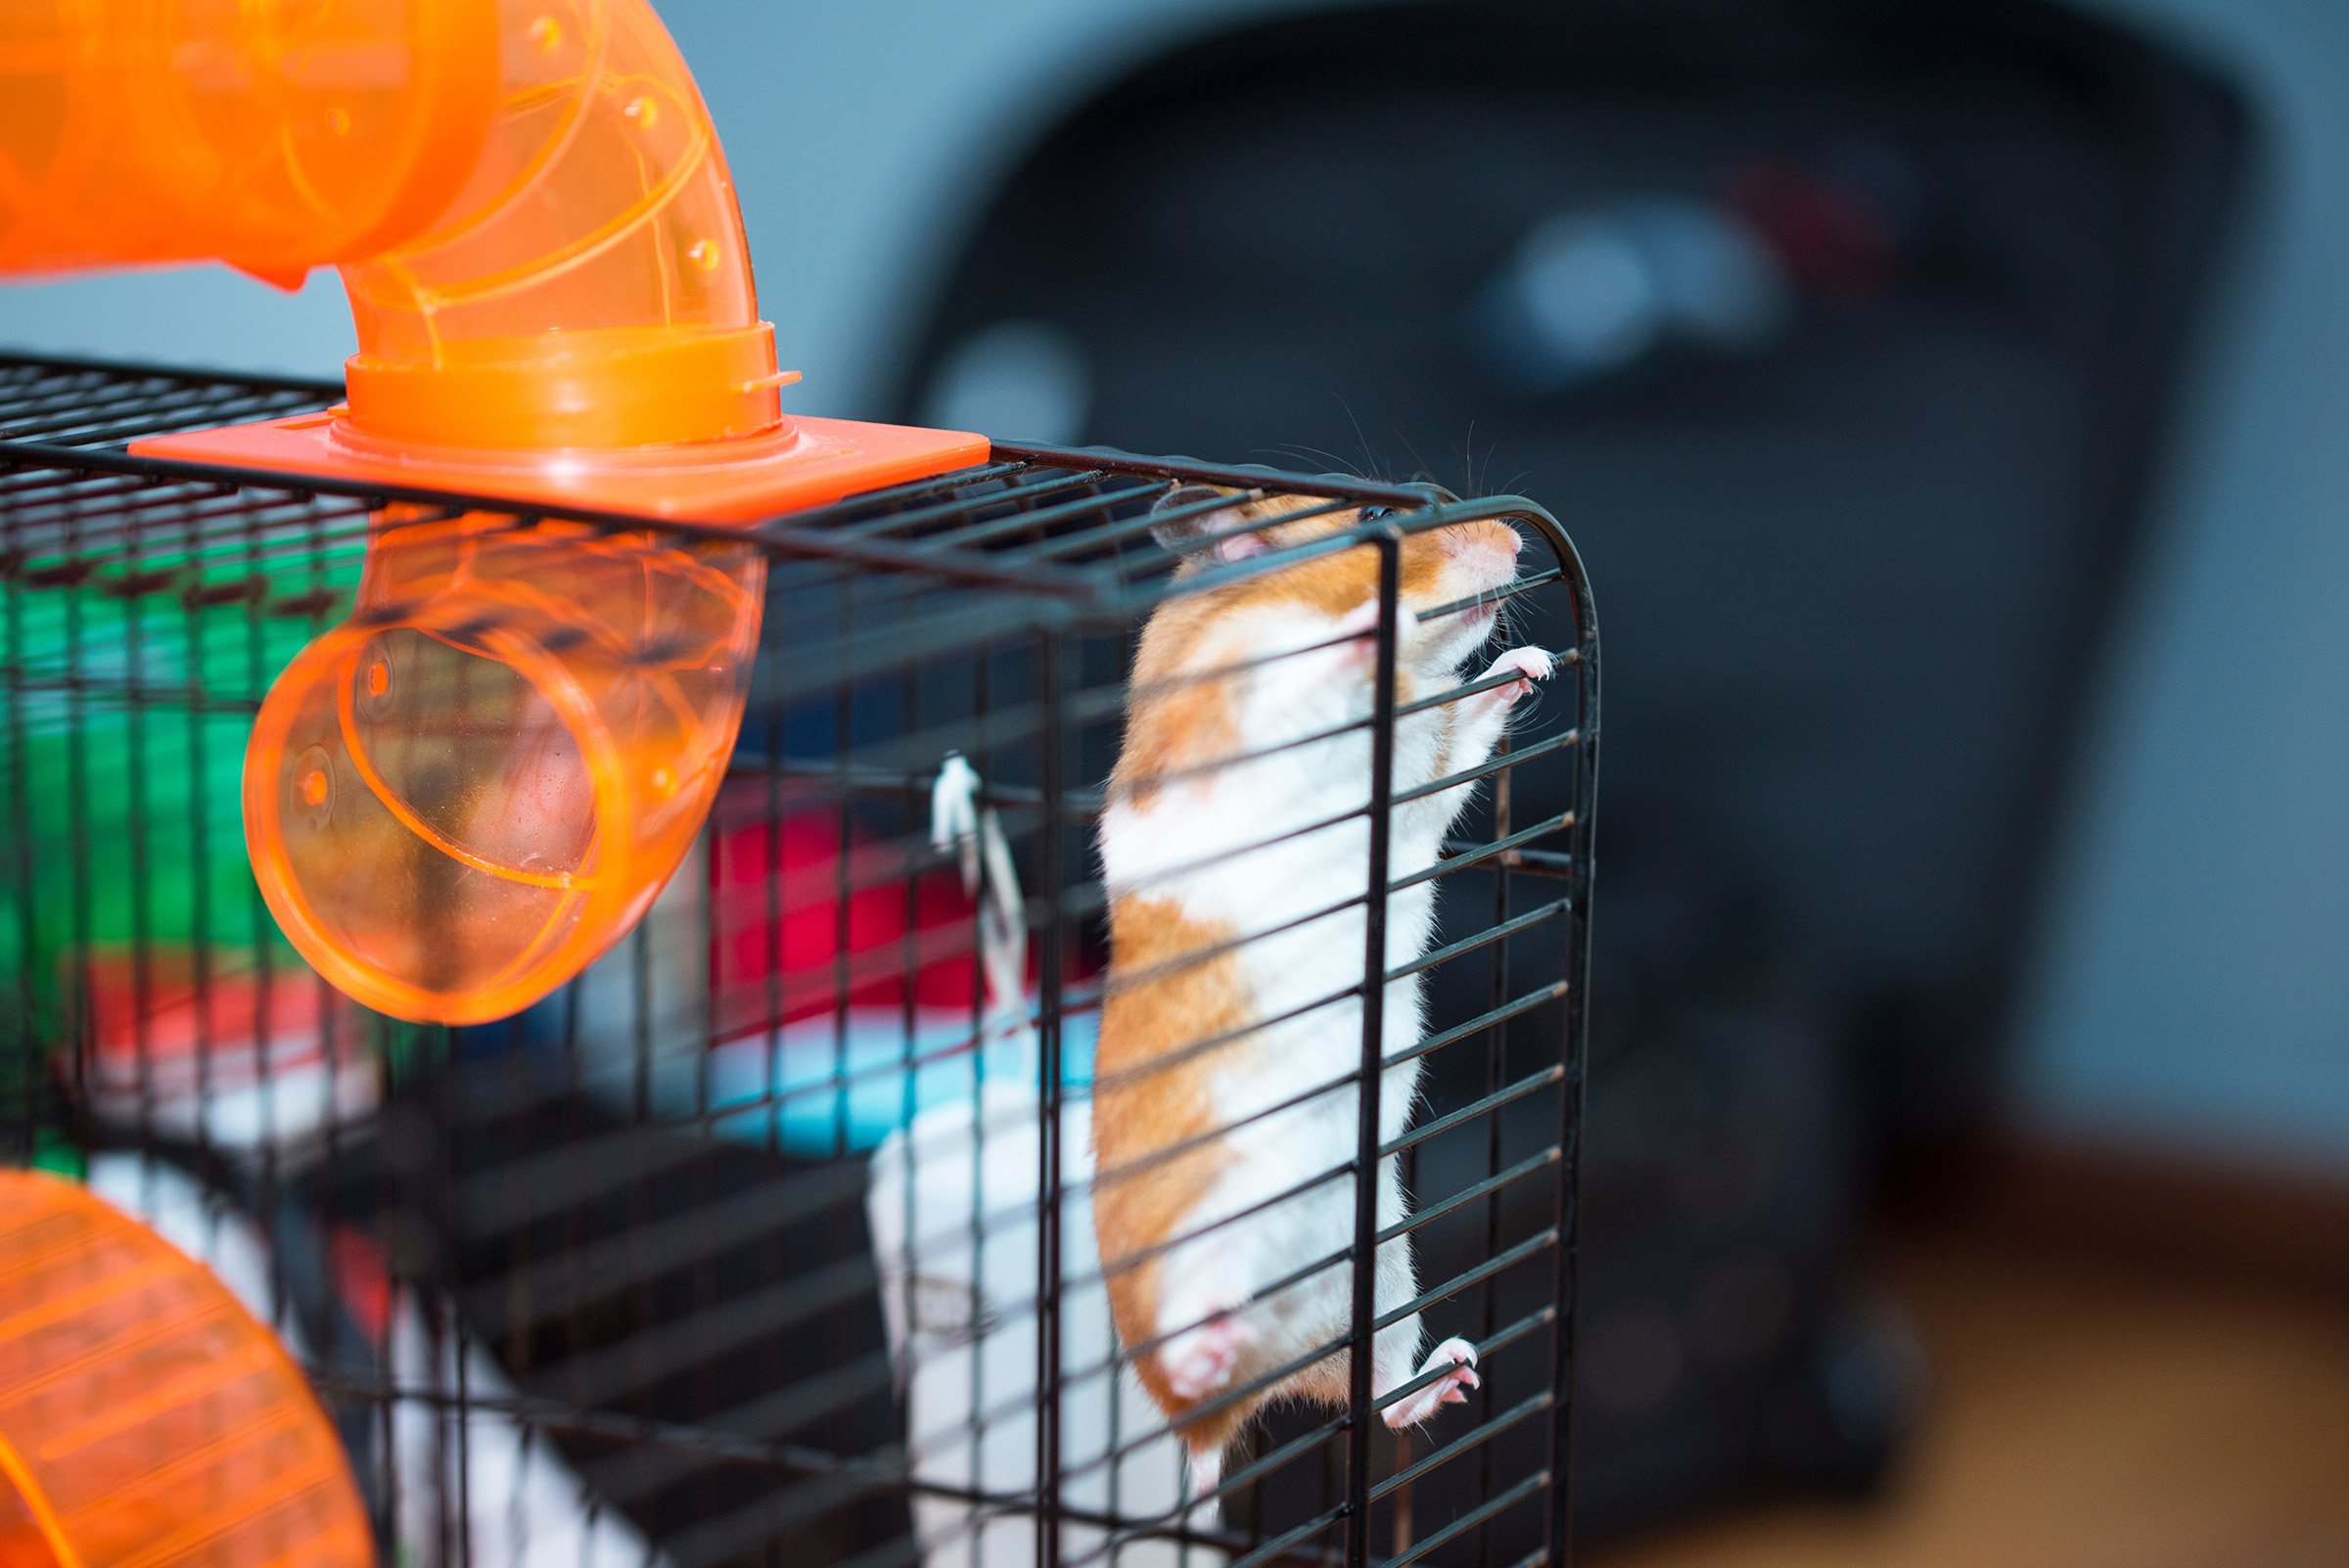 gene-edited hamsters may have tried to escape their cages